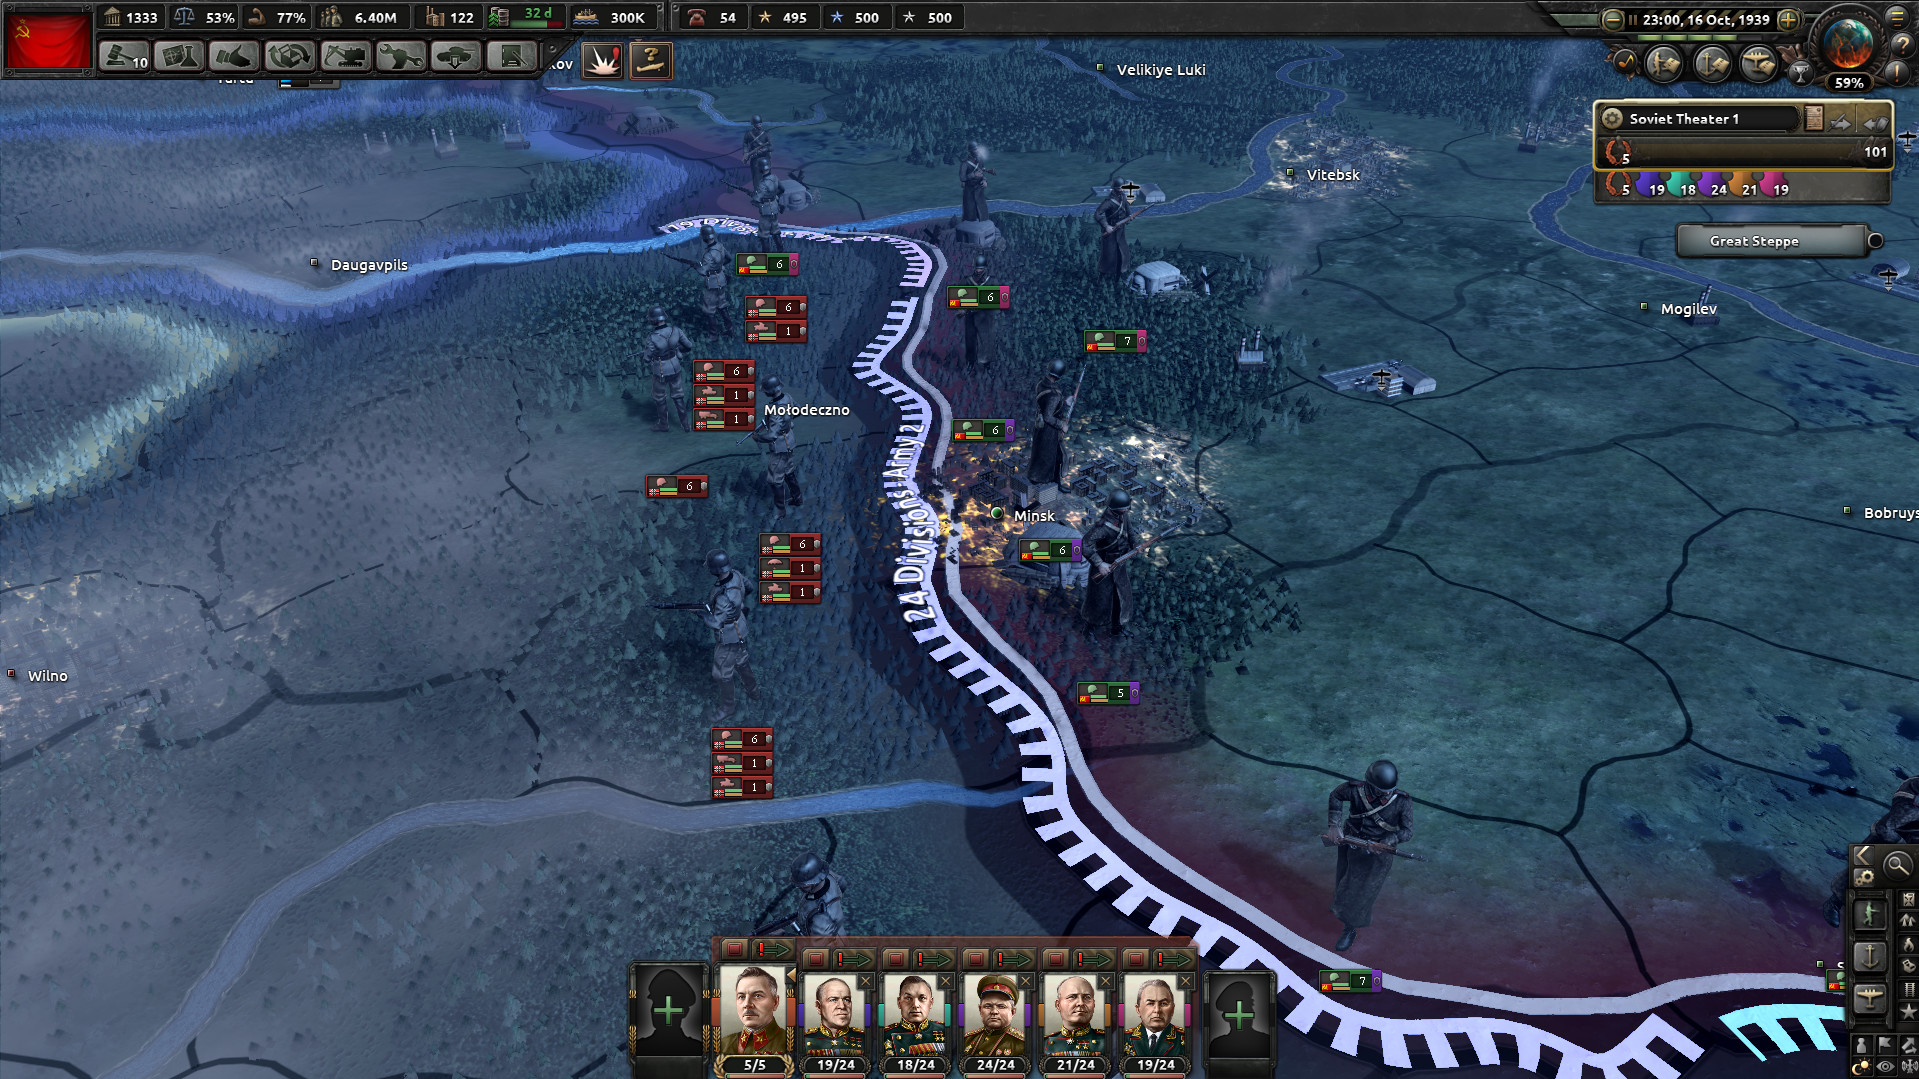 Hearts Of Iron Iv On Steam